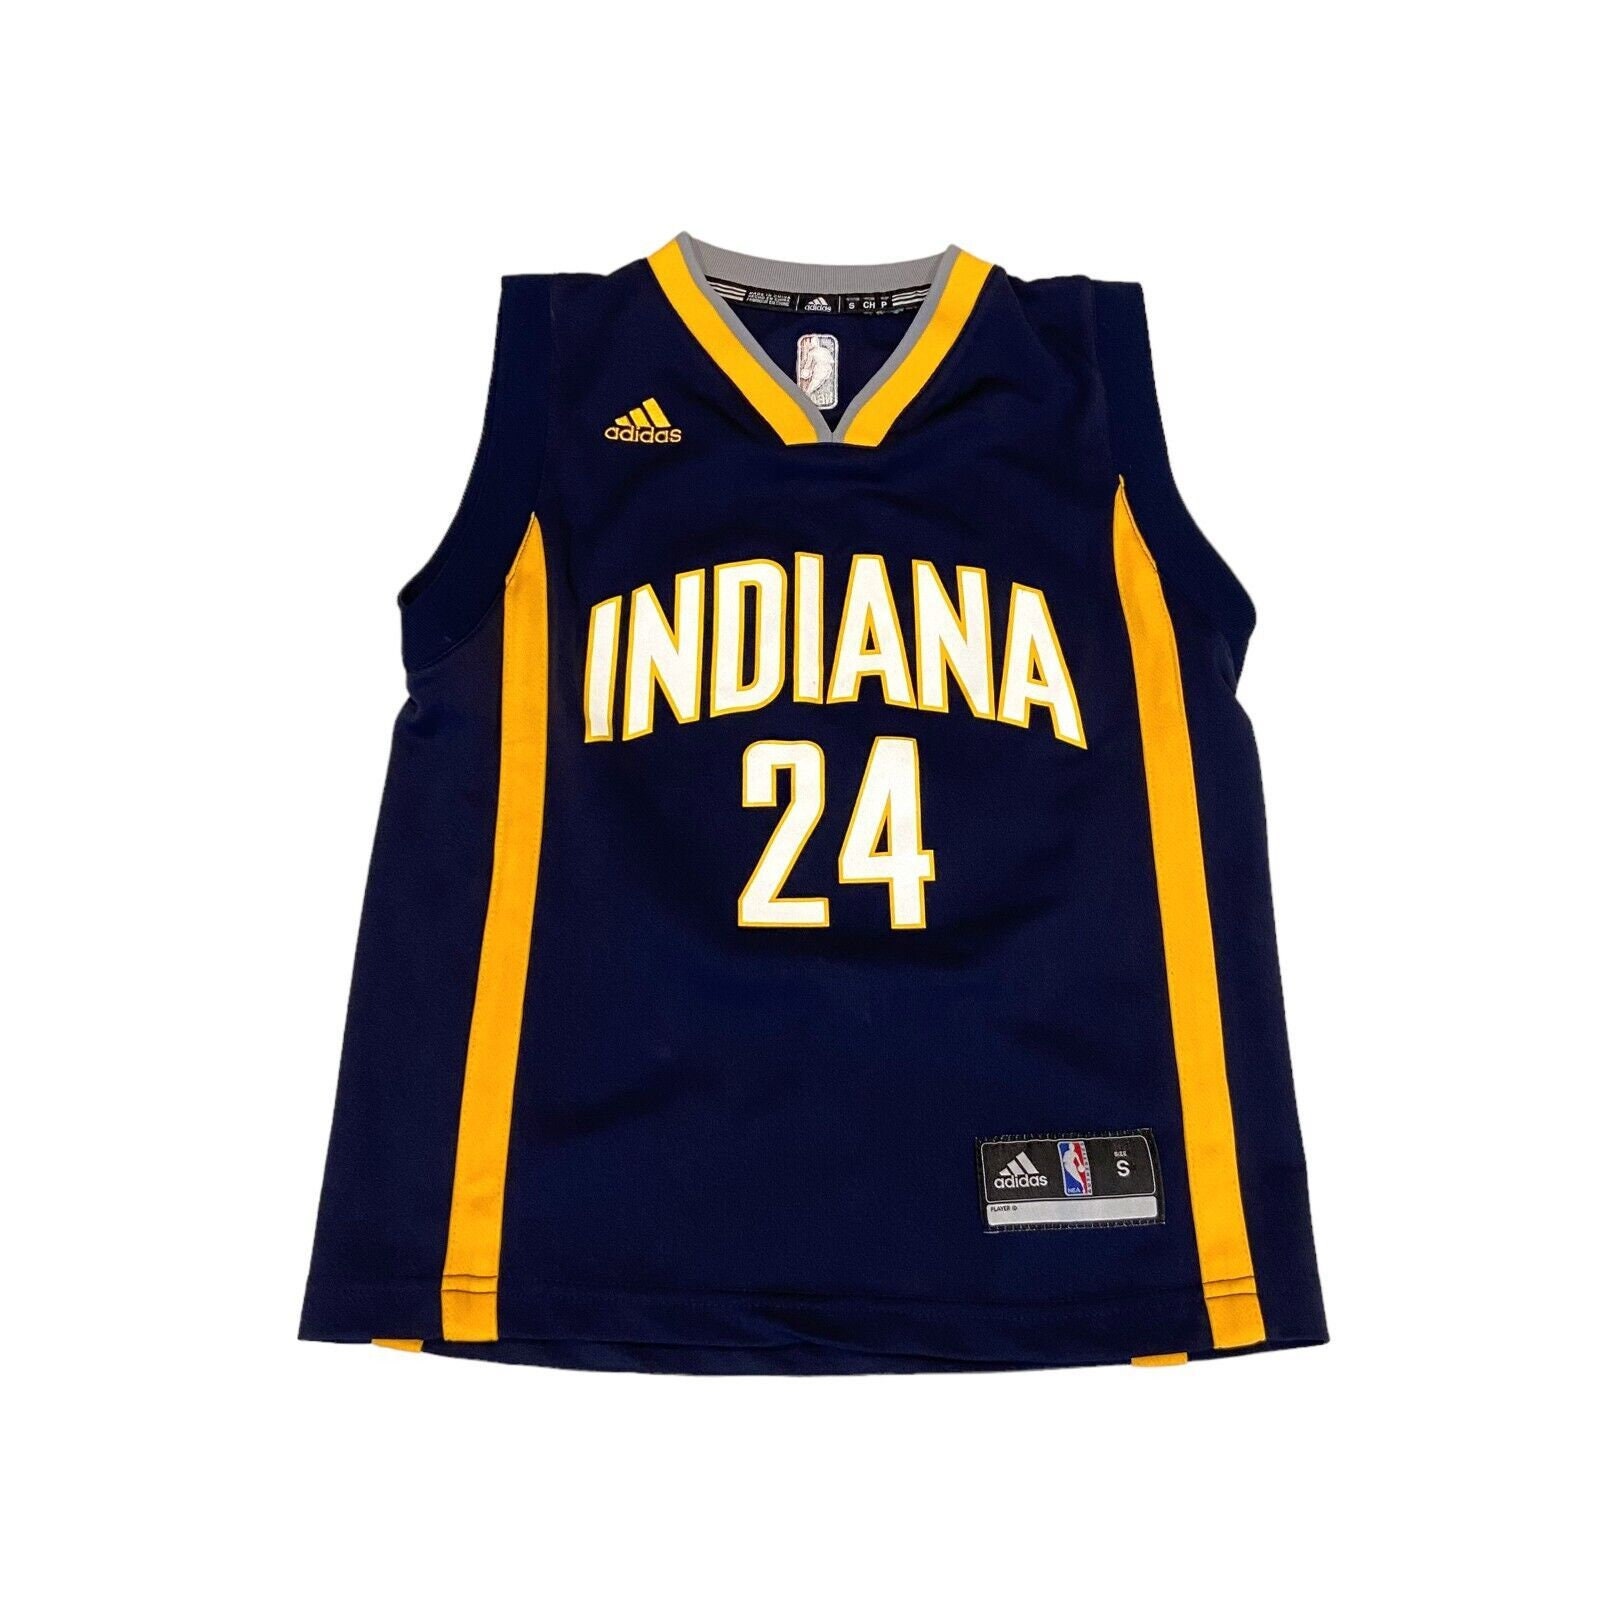 Buy Paul George Jersey Online In India -  India